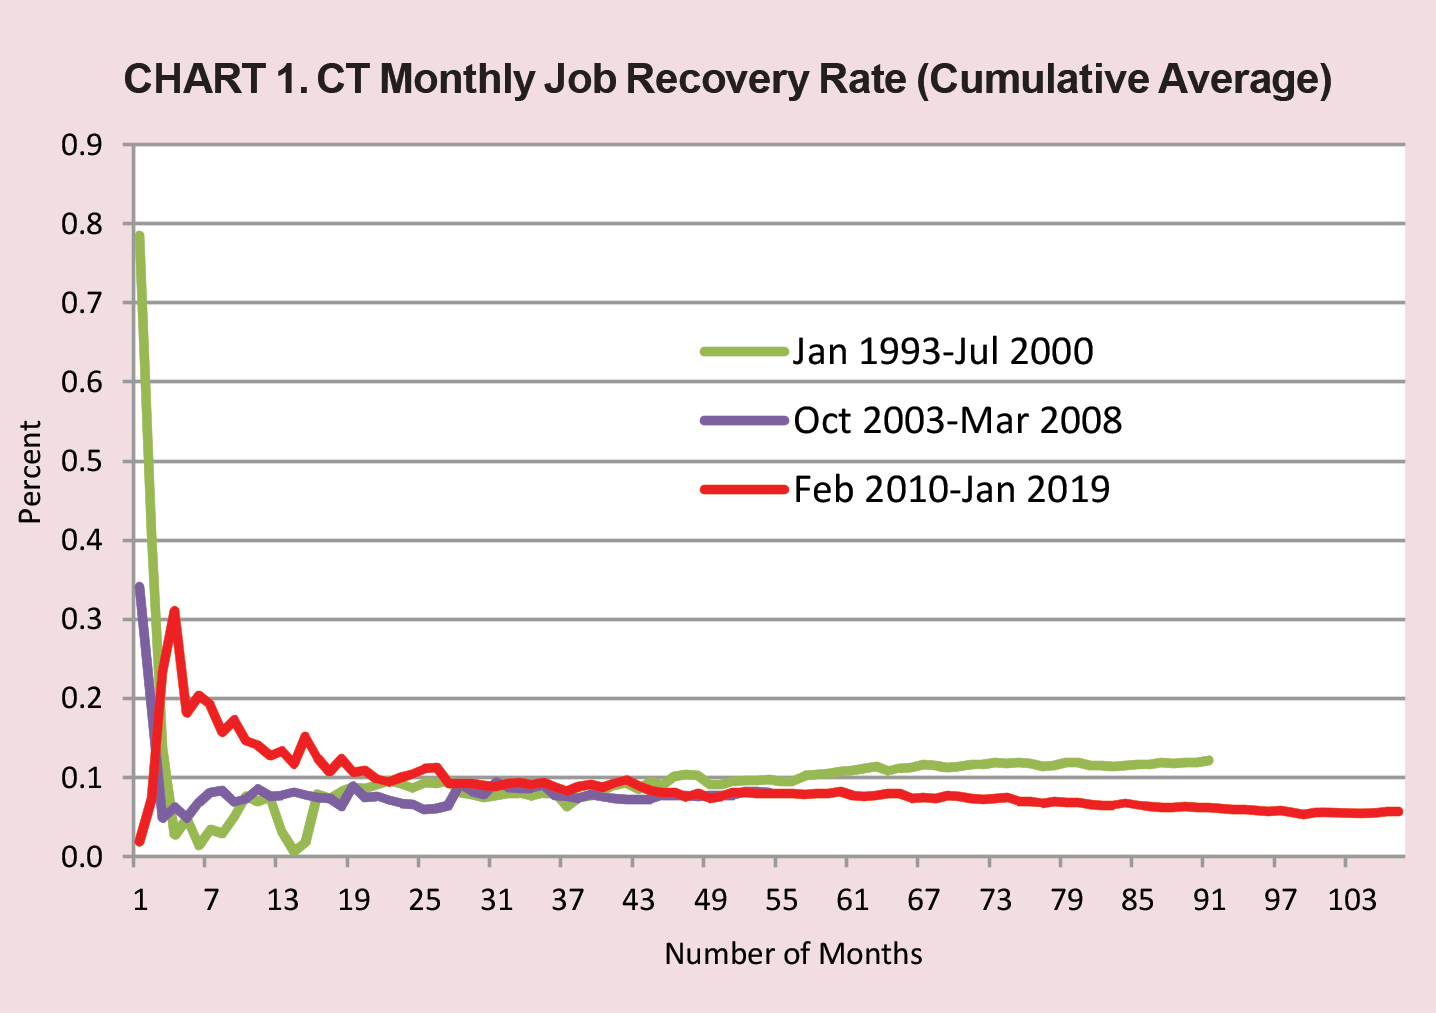 CHART 1. CT Monthly Job Recovery Rate (Cumulative Average)